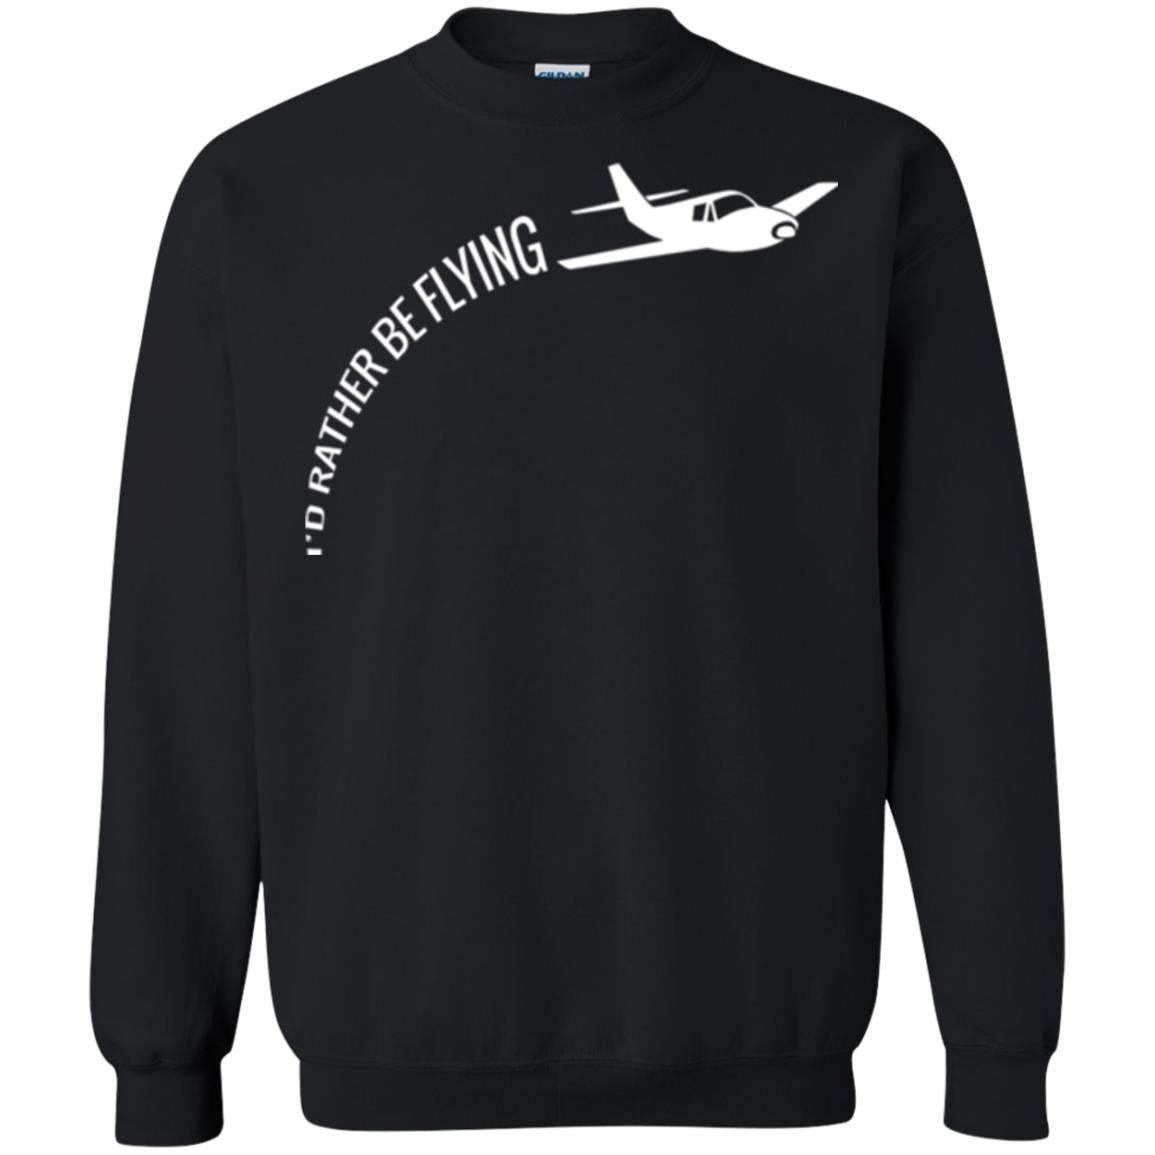 Airplane Pilot T-shirt I_d Rather Be Flying